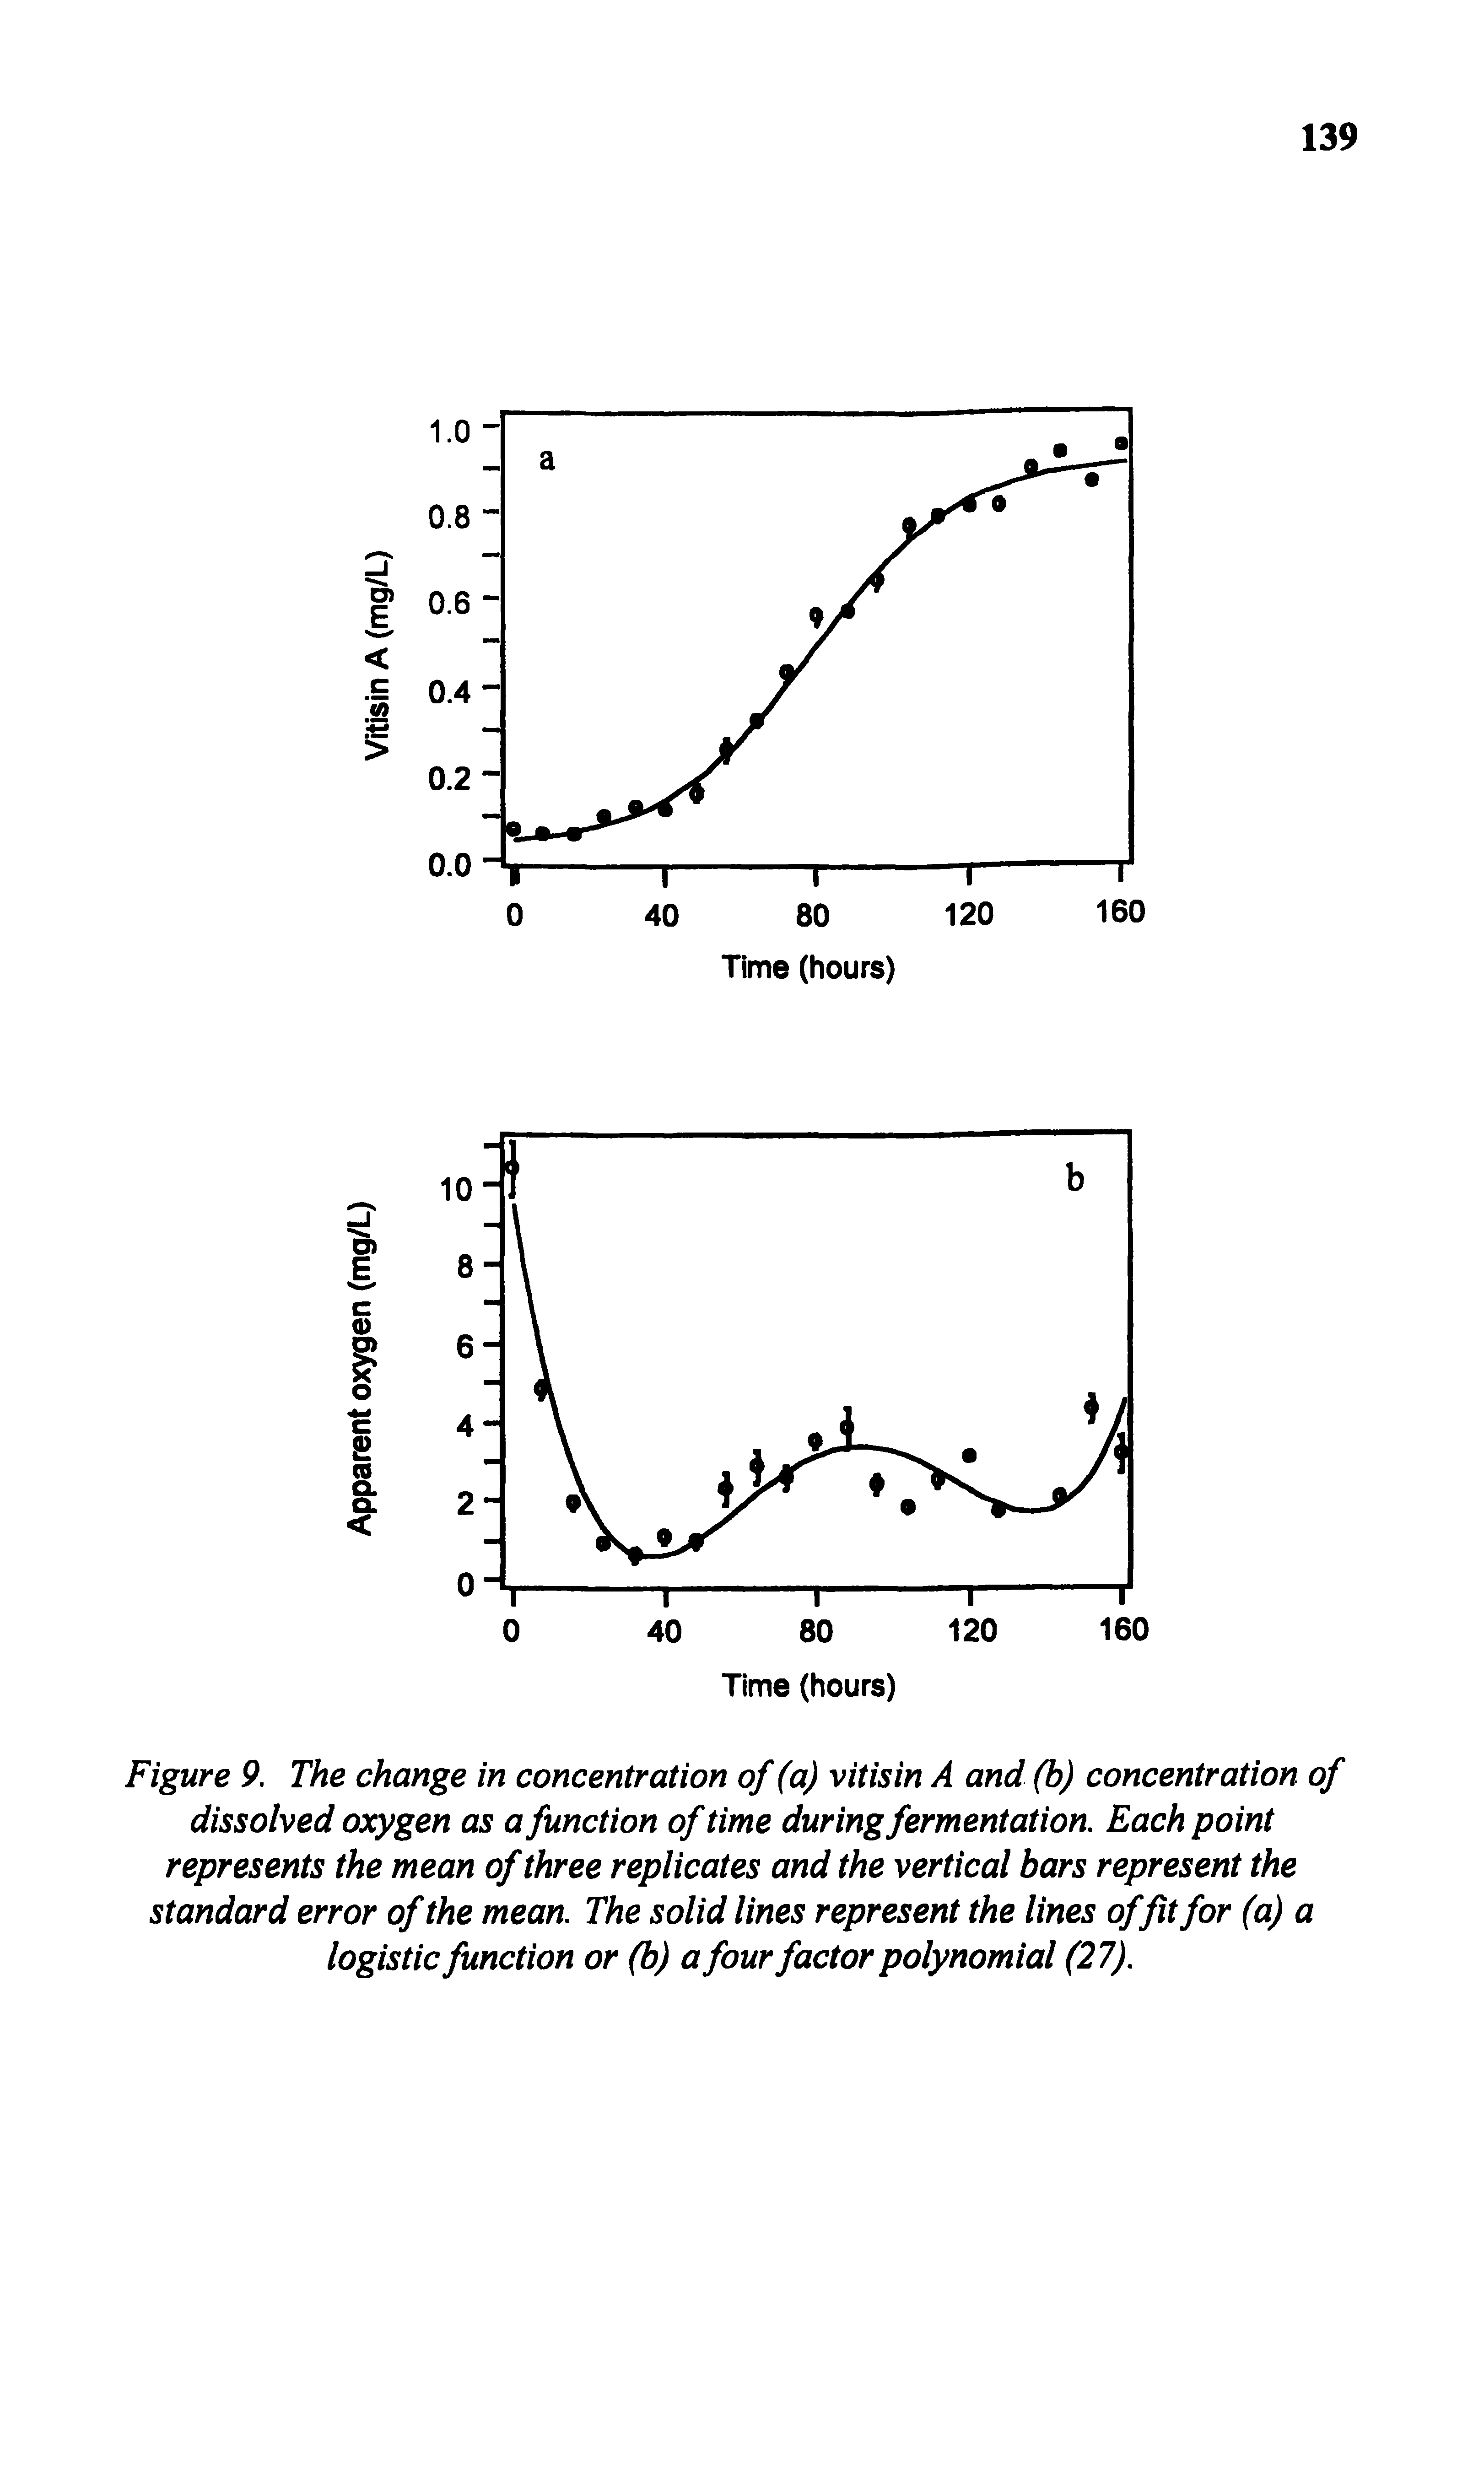 Figure 9. The change in concentration of (a) vitisin A and (b) concentration of dissolved oxygen as a function of time during fermentation. Each point represents the mean of three replicates and the vertical bars represent the standard error of the mean. The solid lines represent the lines offit for (a) a logistic function or (b) a four factor polynomial (27).